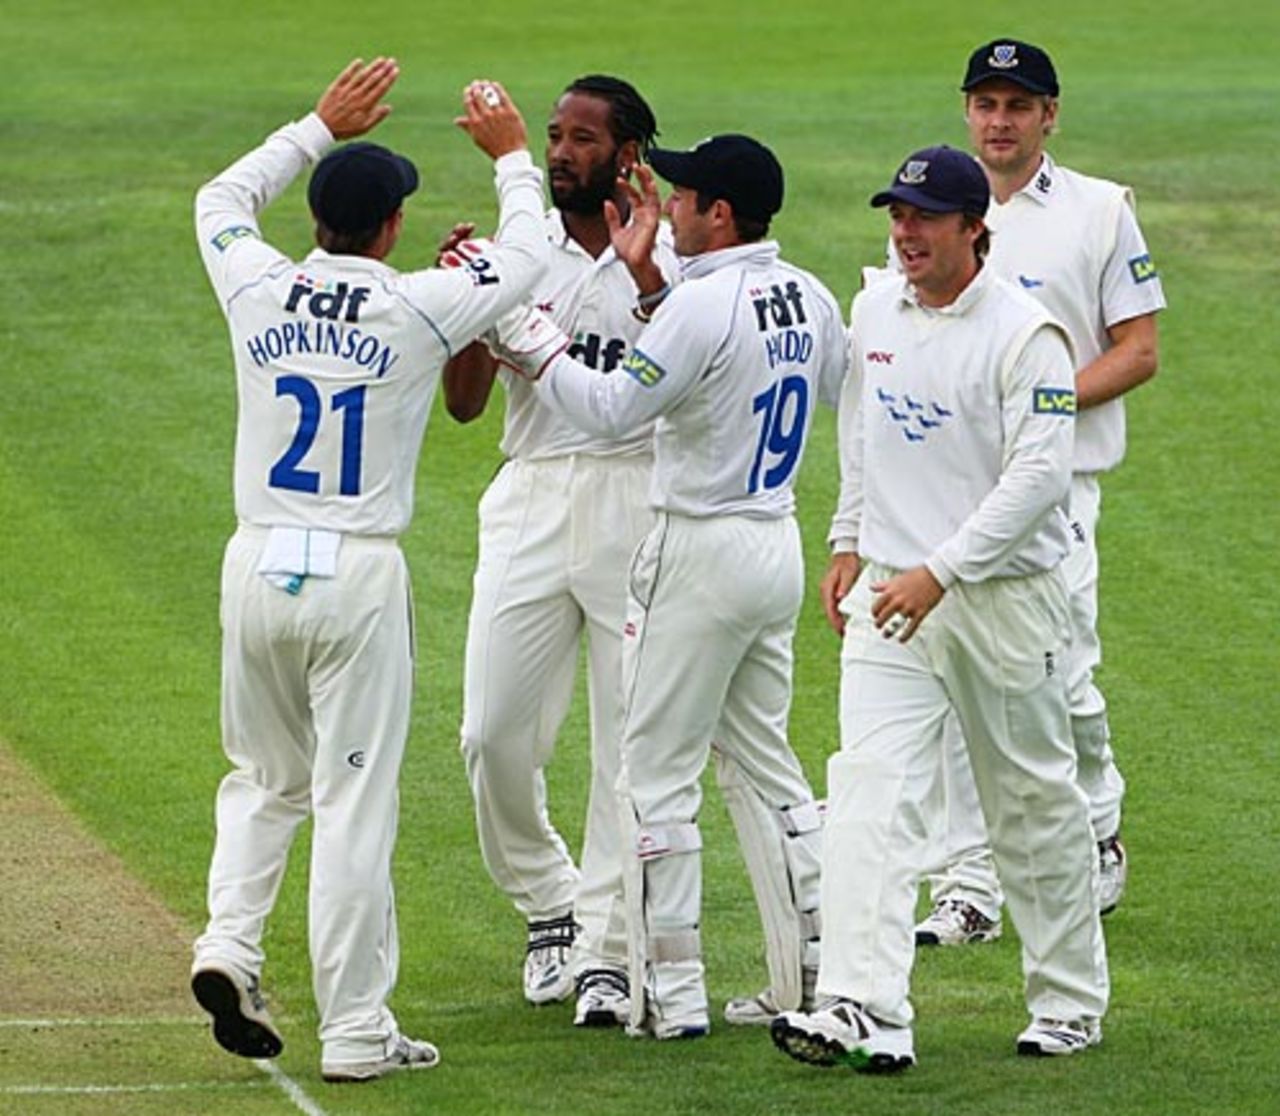 Corey Collymore celebrates a wicket, Warwickshire v Sussex, County Championship, Edgbaston, 2nd day, July 8, 2009